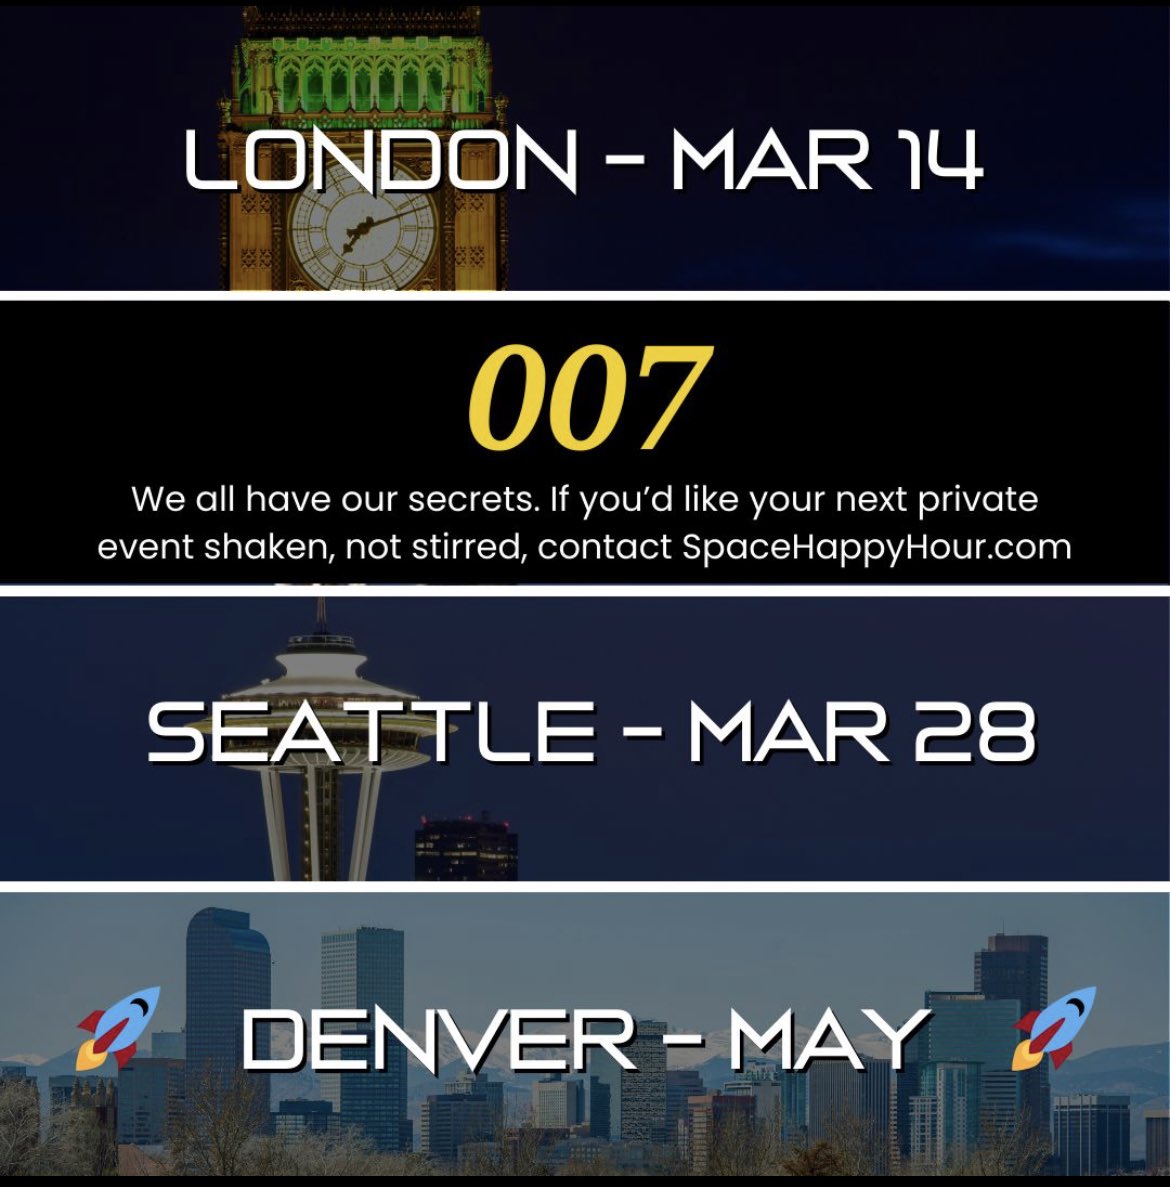 Spring is heating-up with Space Happy Hours around the world! Denver is set to launch May 23 (event details and registration opens April 15). More events are on the way, subscribe at SpaceHappyHour.com to be the first to know!

#space #spaceindustry